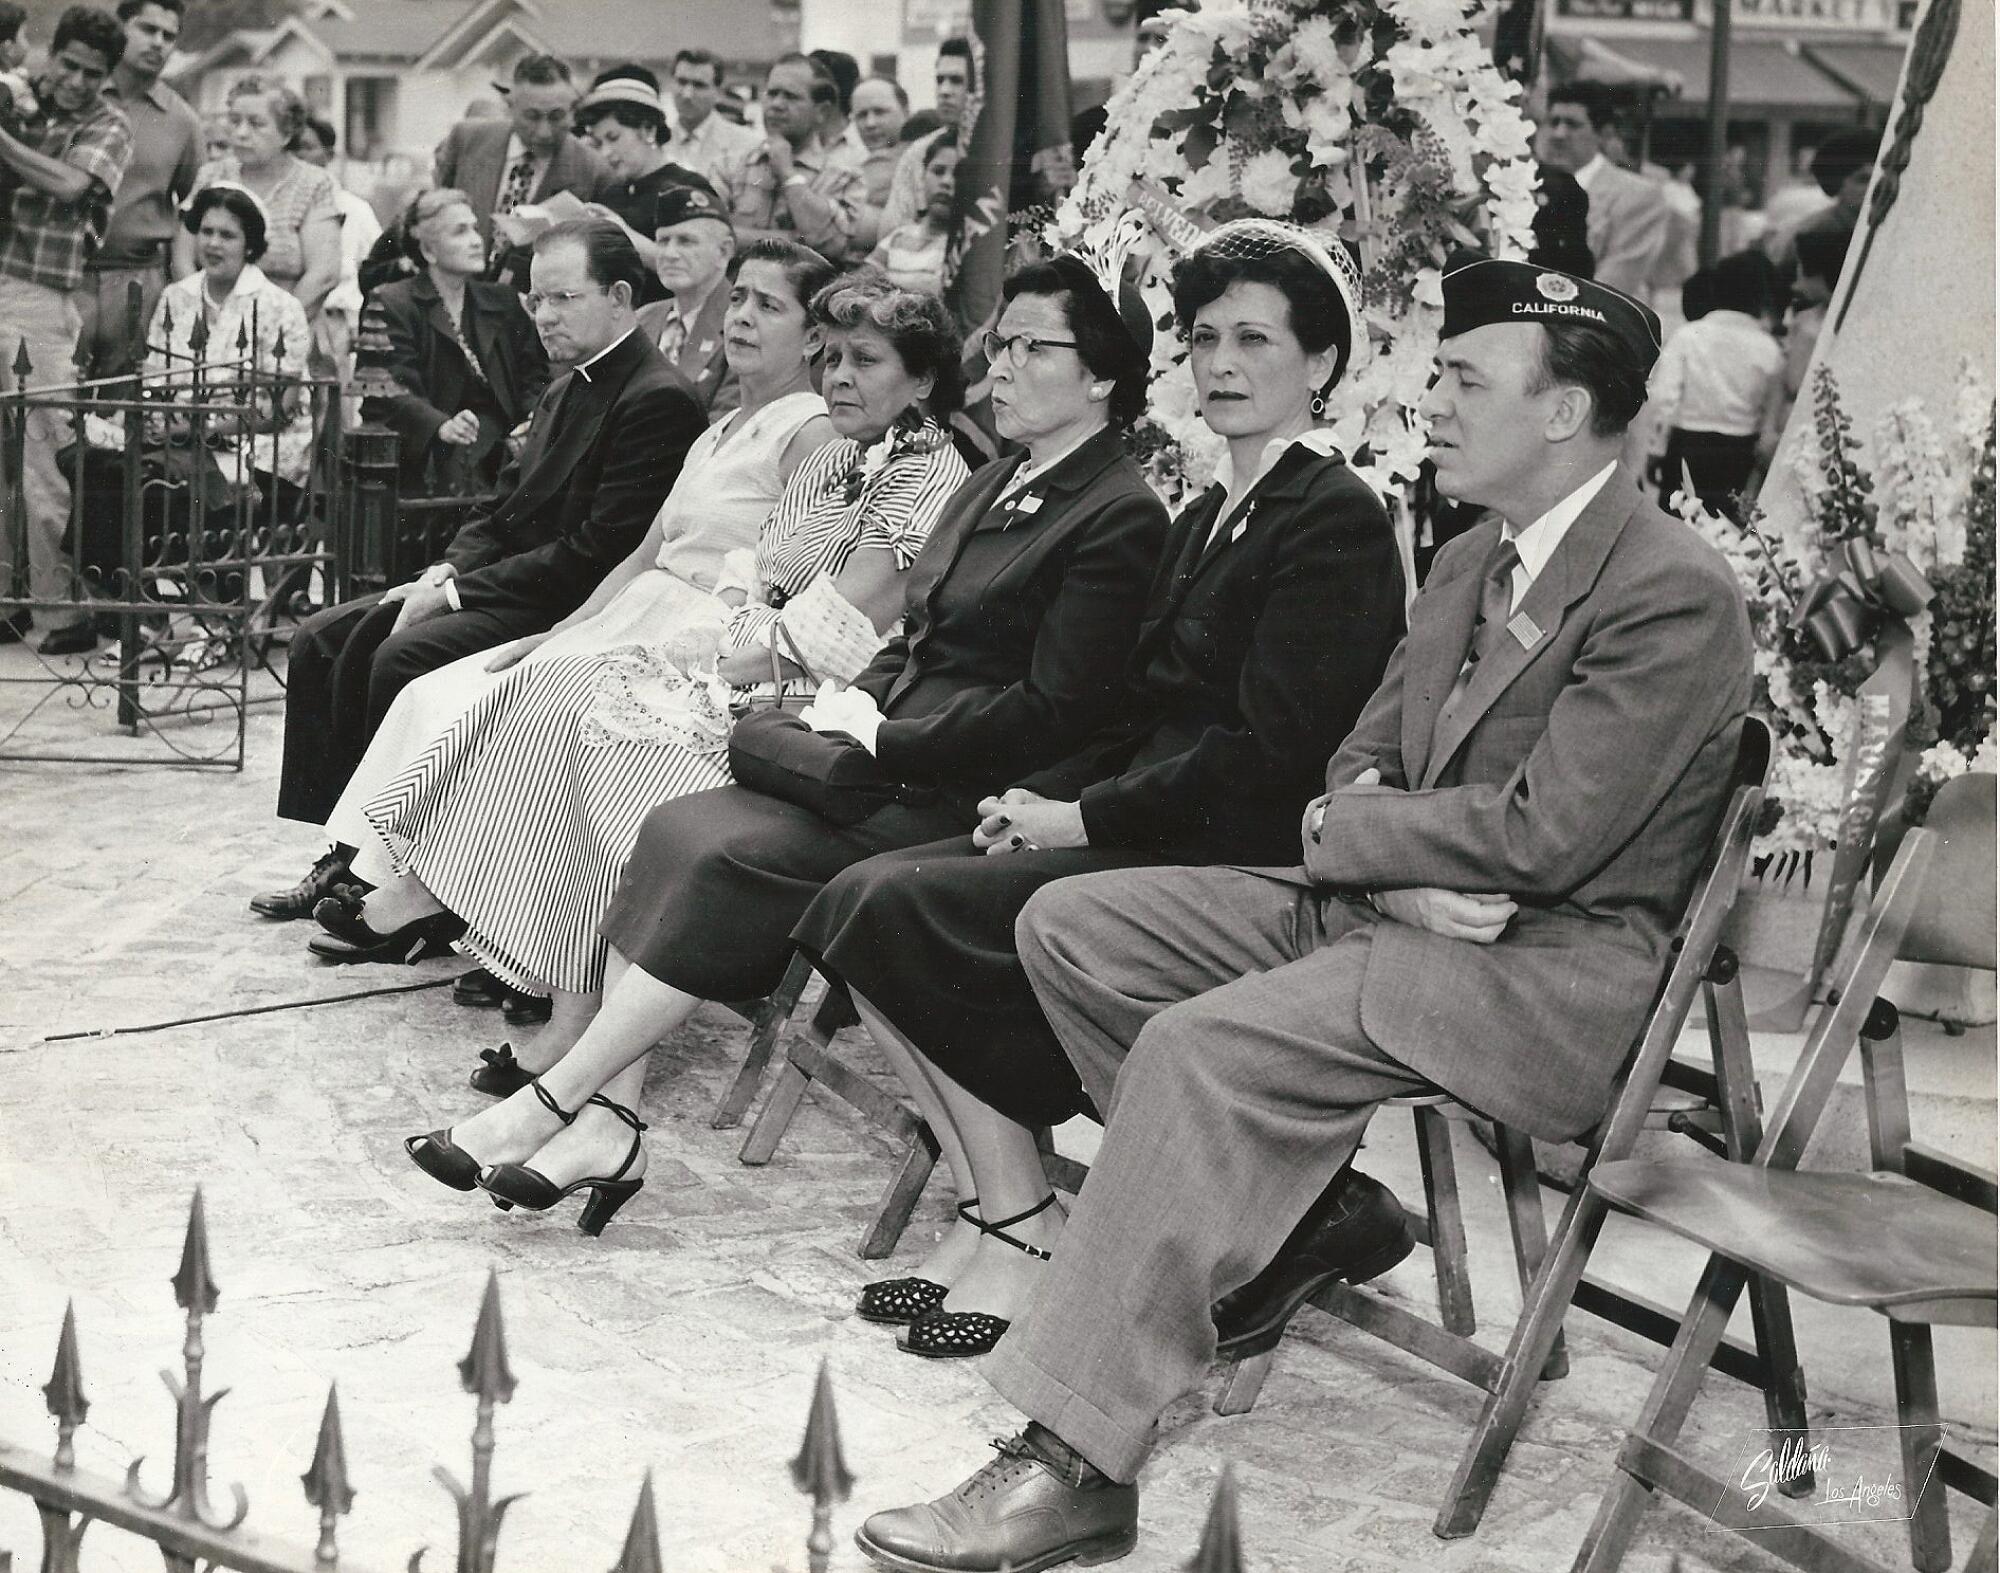 People sit in folding chairs at a ceremony